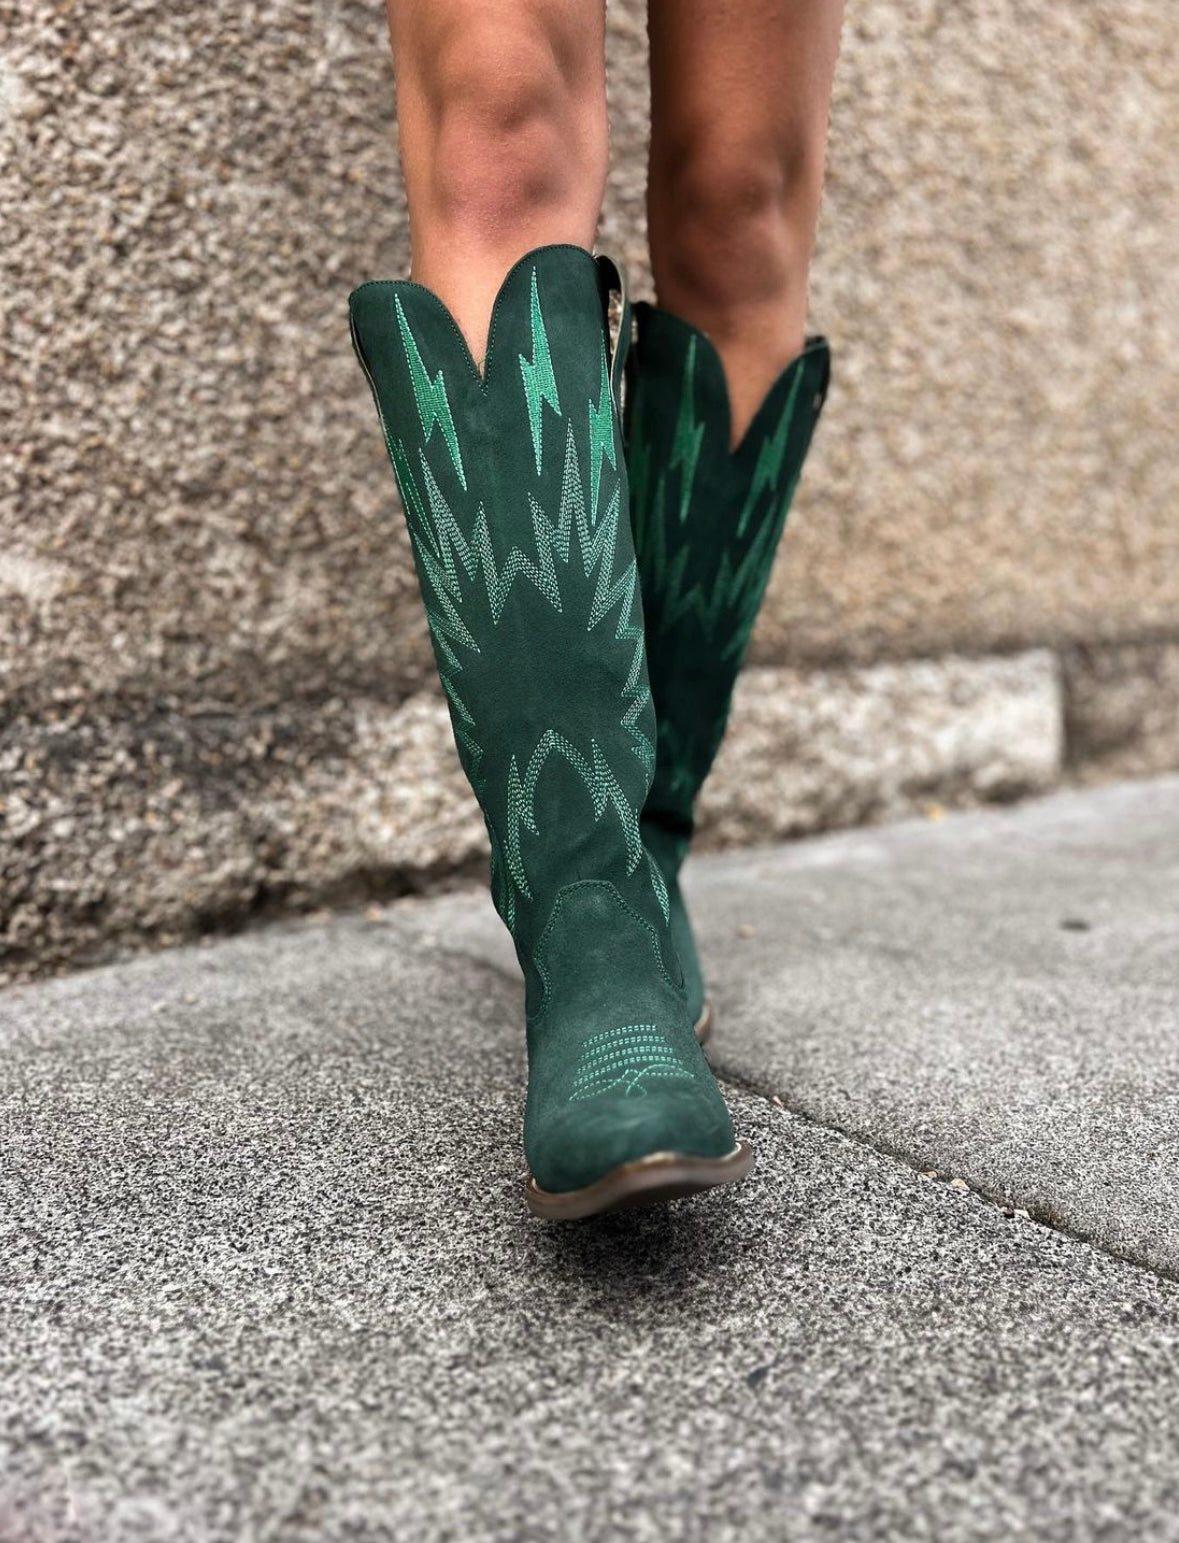 Thunder Road Boots Green